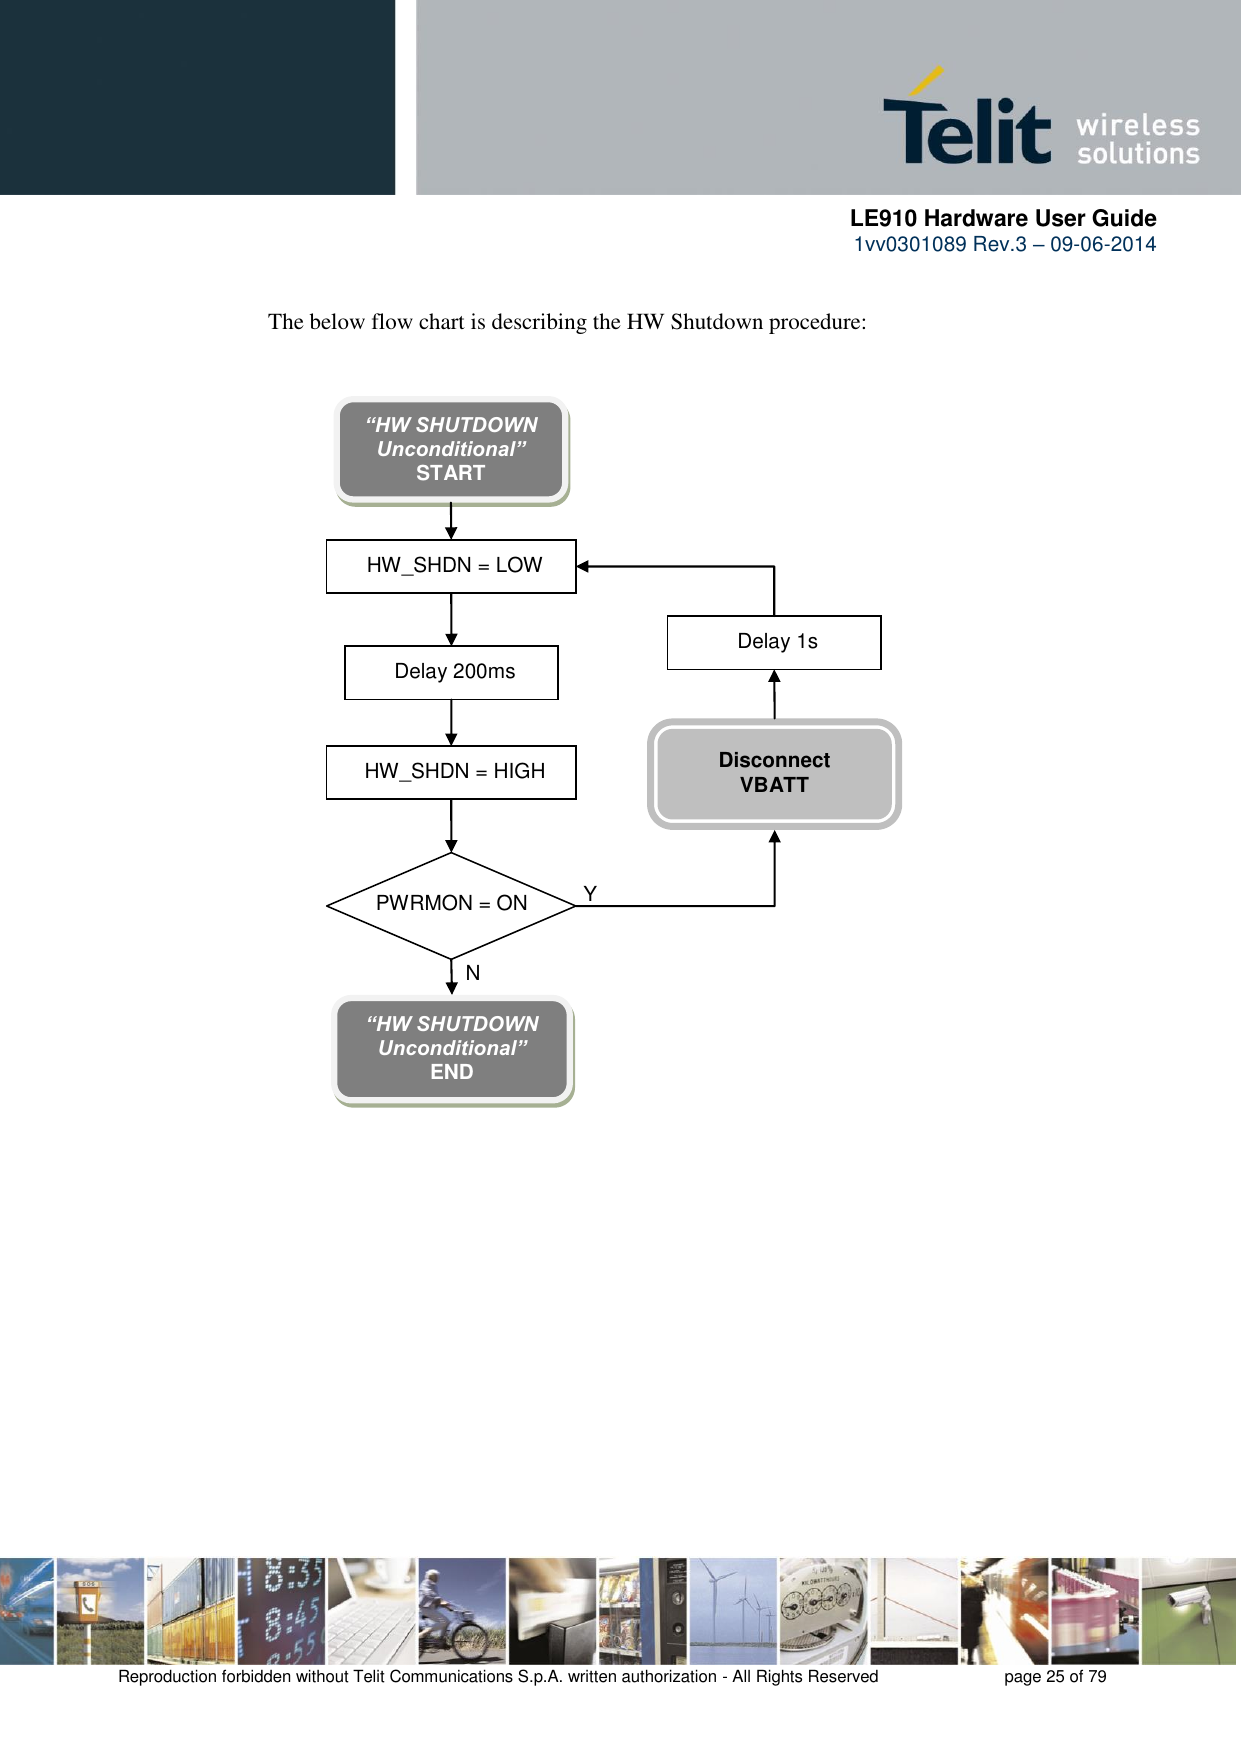      LE910 Hardware User Guide 1vv0301089 Rev.3 – 09-06-2014    Reproduction forbidden without Telit Communications S.p.A. written authorization - All Rights Reserved    page 25 of 79  The below flow chart is describing the HW Shutdown procedure:     “HW SHUTDOWN Unconditional” START HW_SHDN = LOW  Delay 200ms HW_SHDN = HIGH  PWRMON = ON  Delay 1s Y N Disconnect  VBATT “HW SHUTDOWN Unconditional” END  